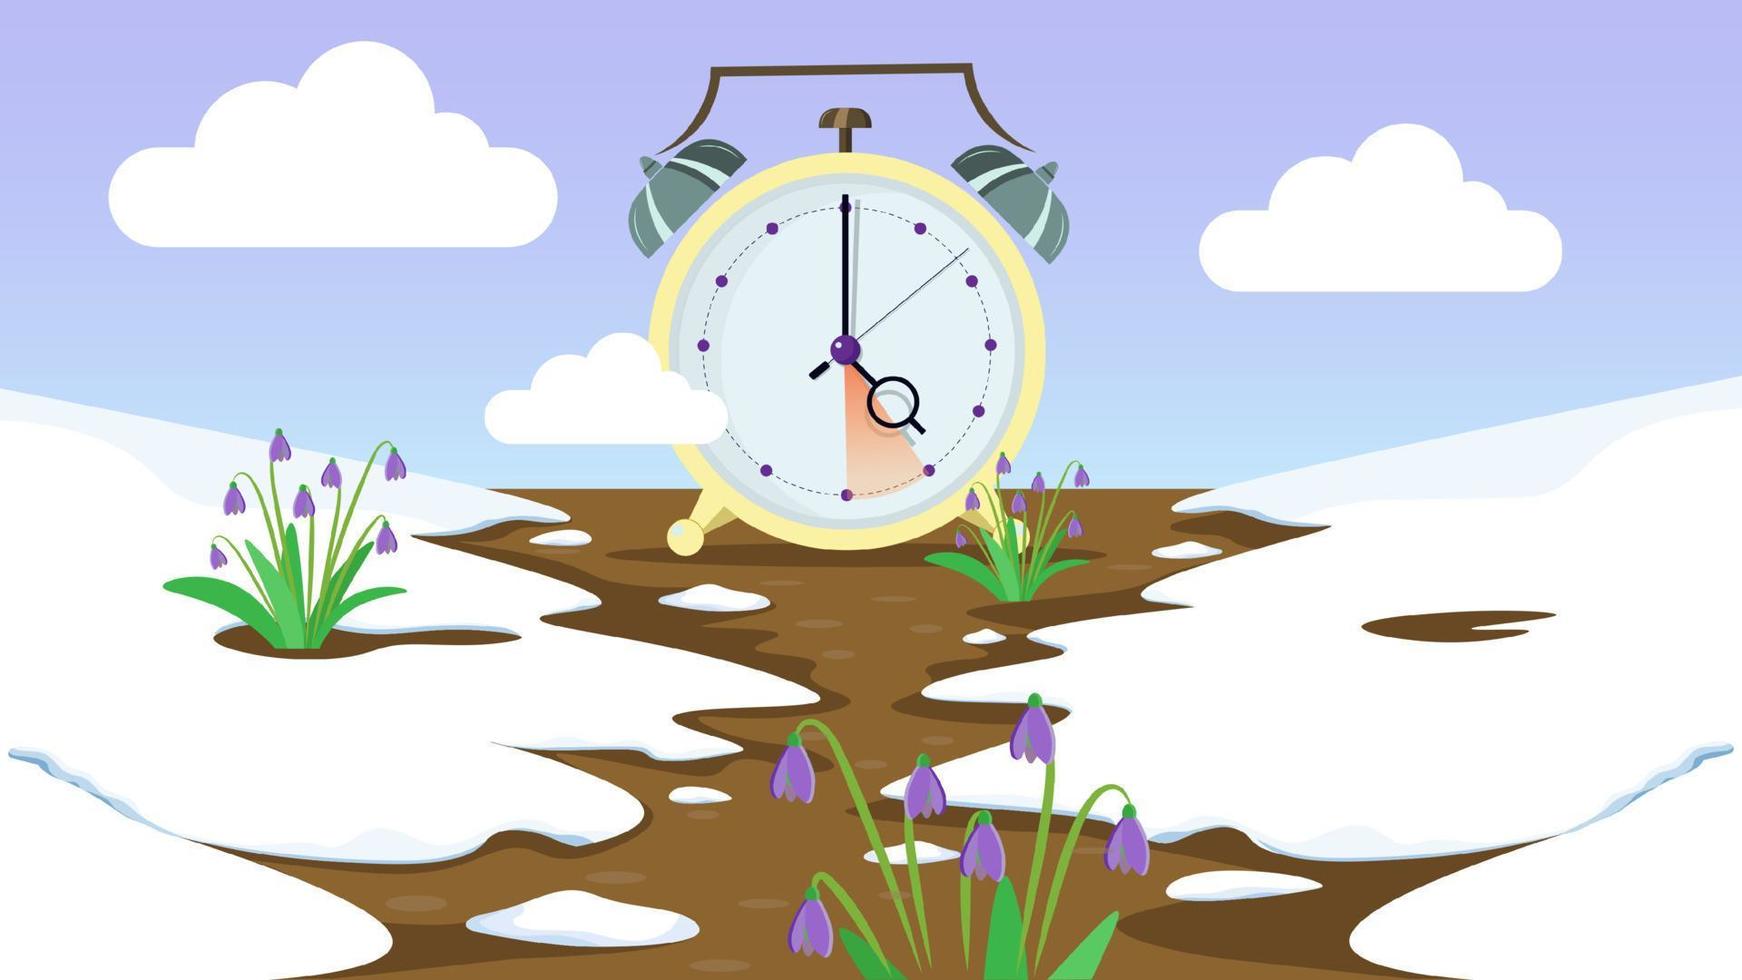 Daylight saving time banner. Clocks move forward. Squill flowers blossom and melting snow. Spring clock change concept. vector